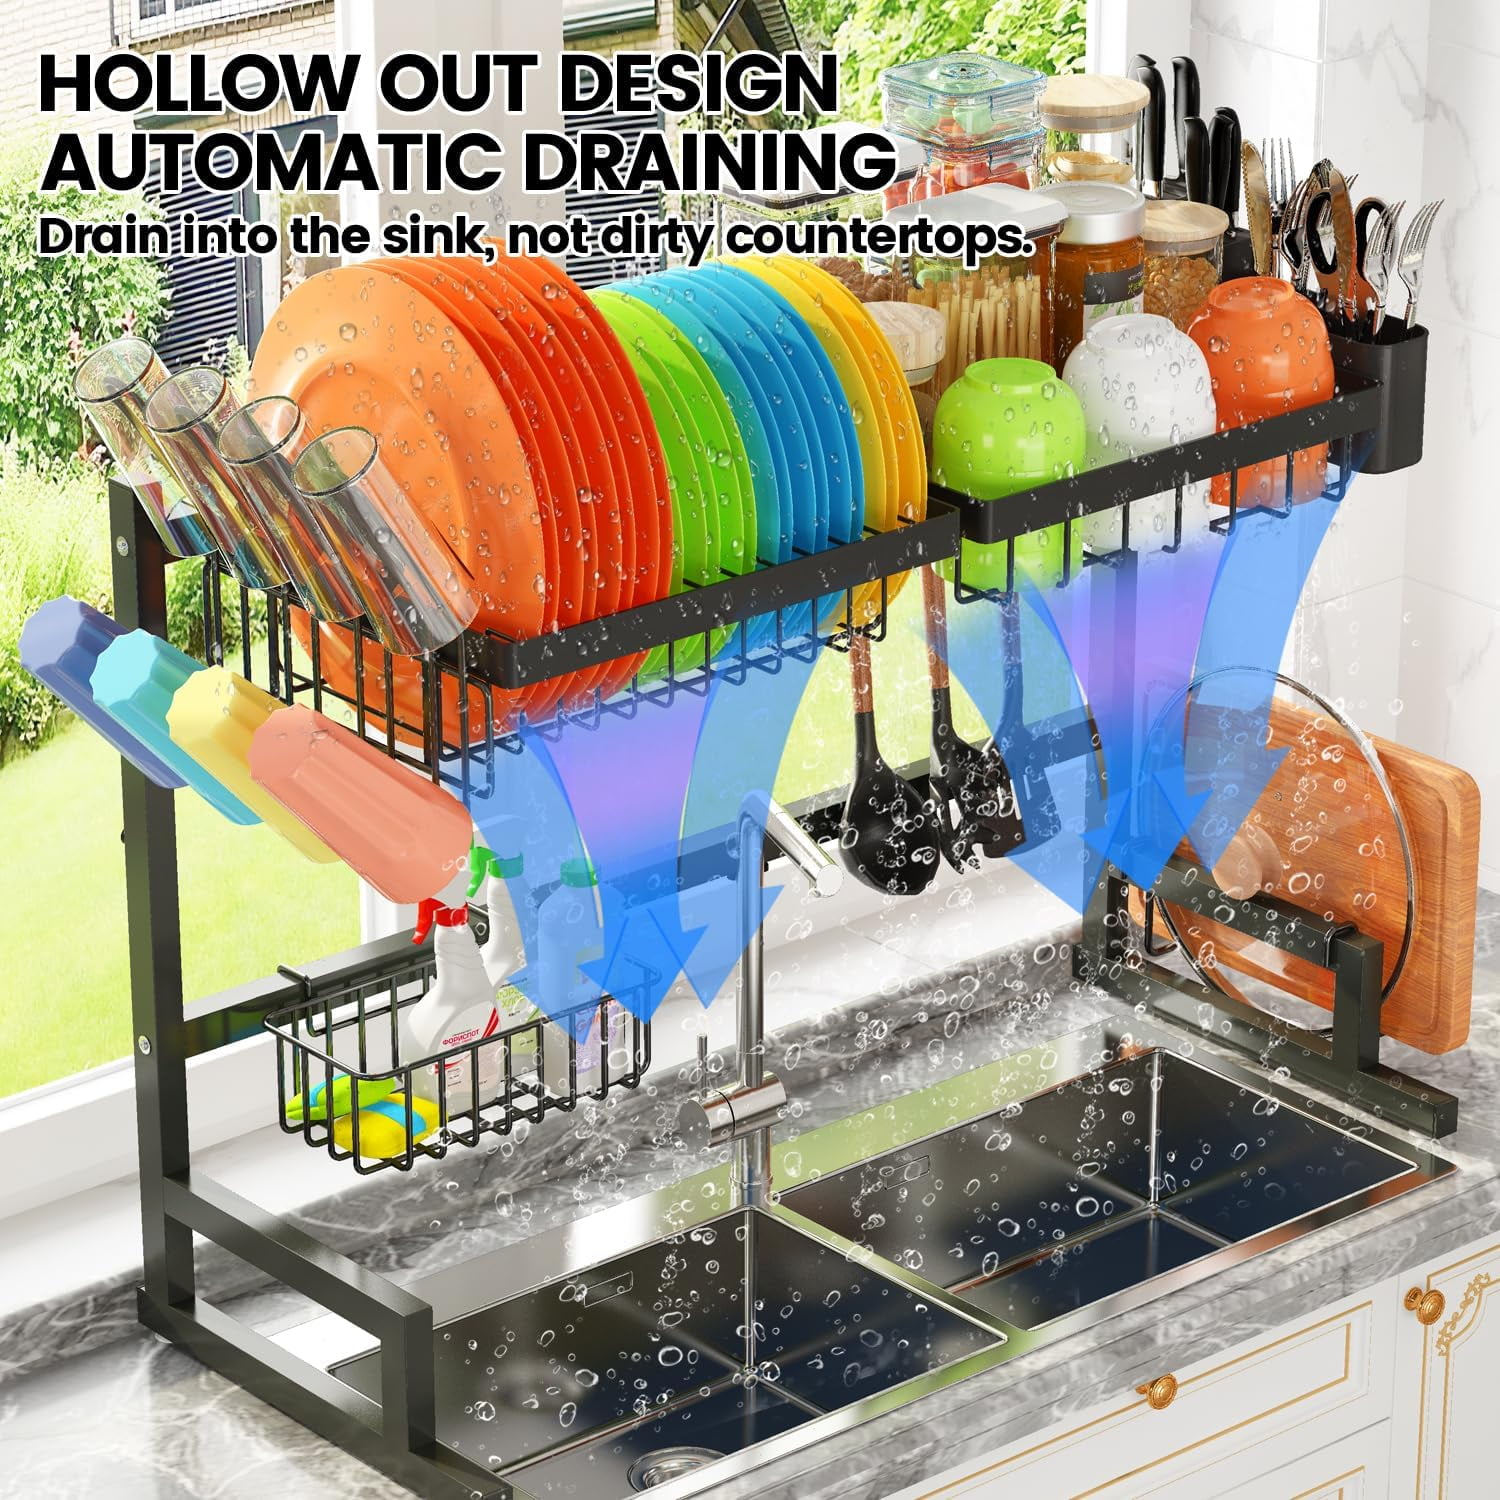 ADBIU Over The Sink Dish Drying Rack (Expandable Height and Length